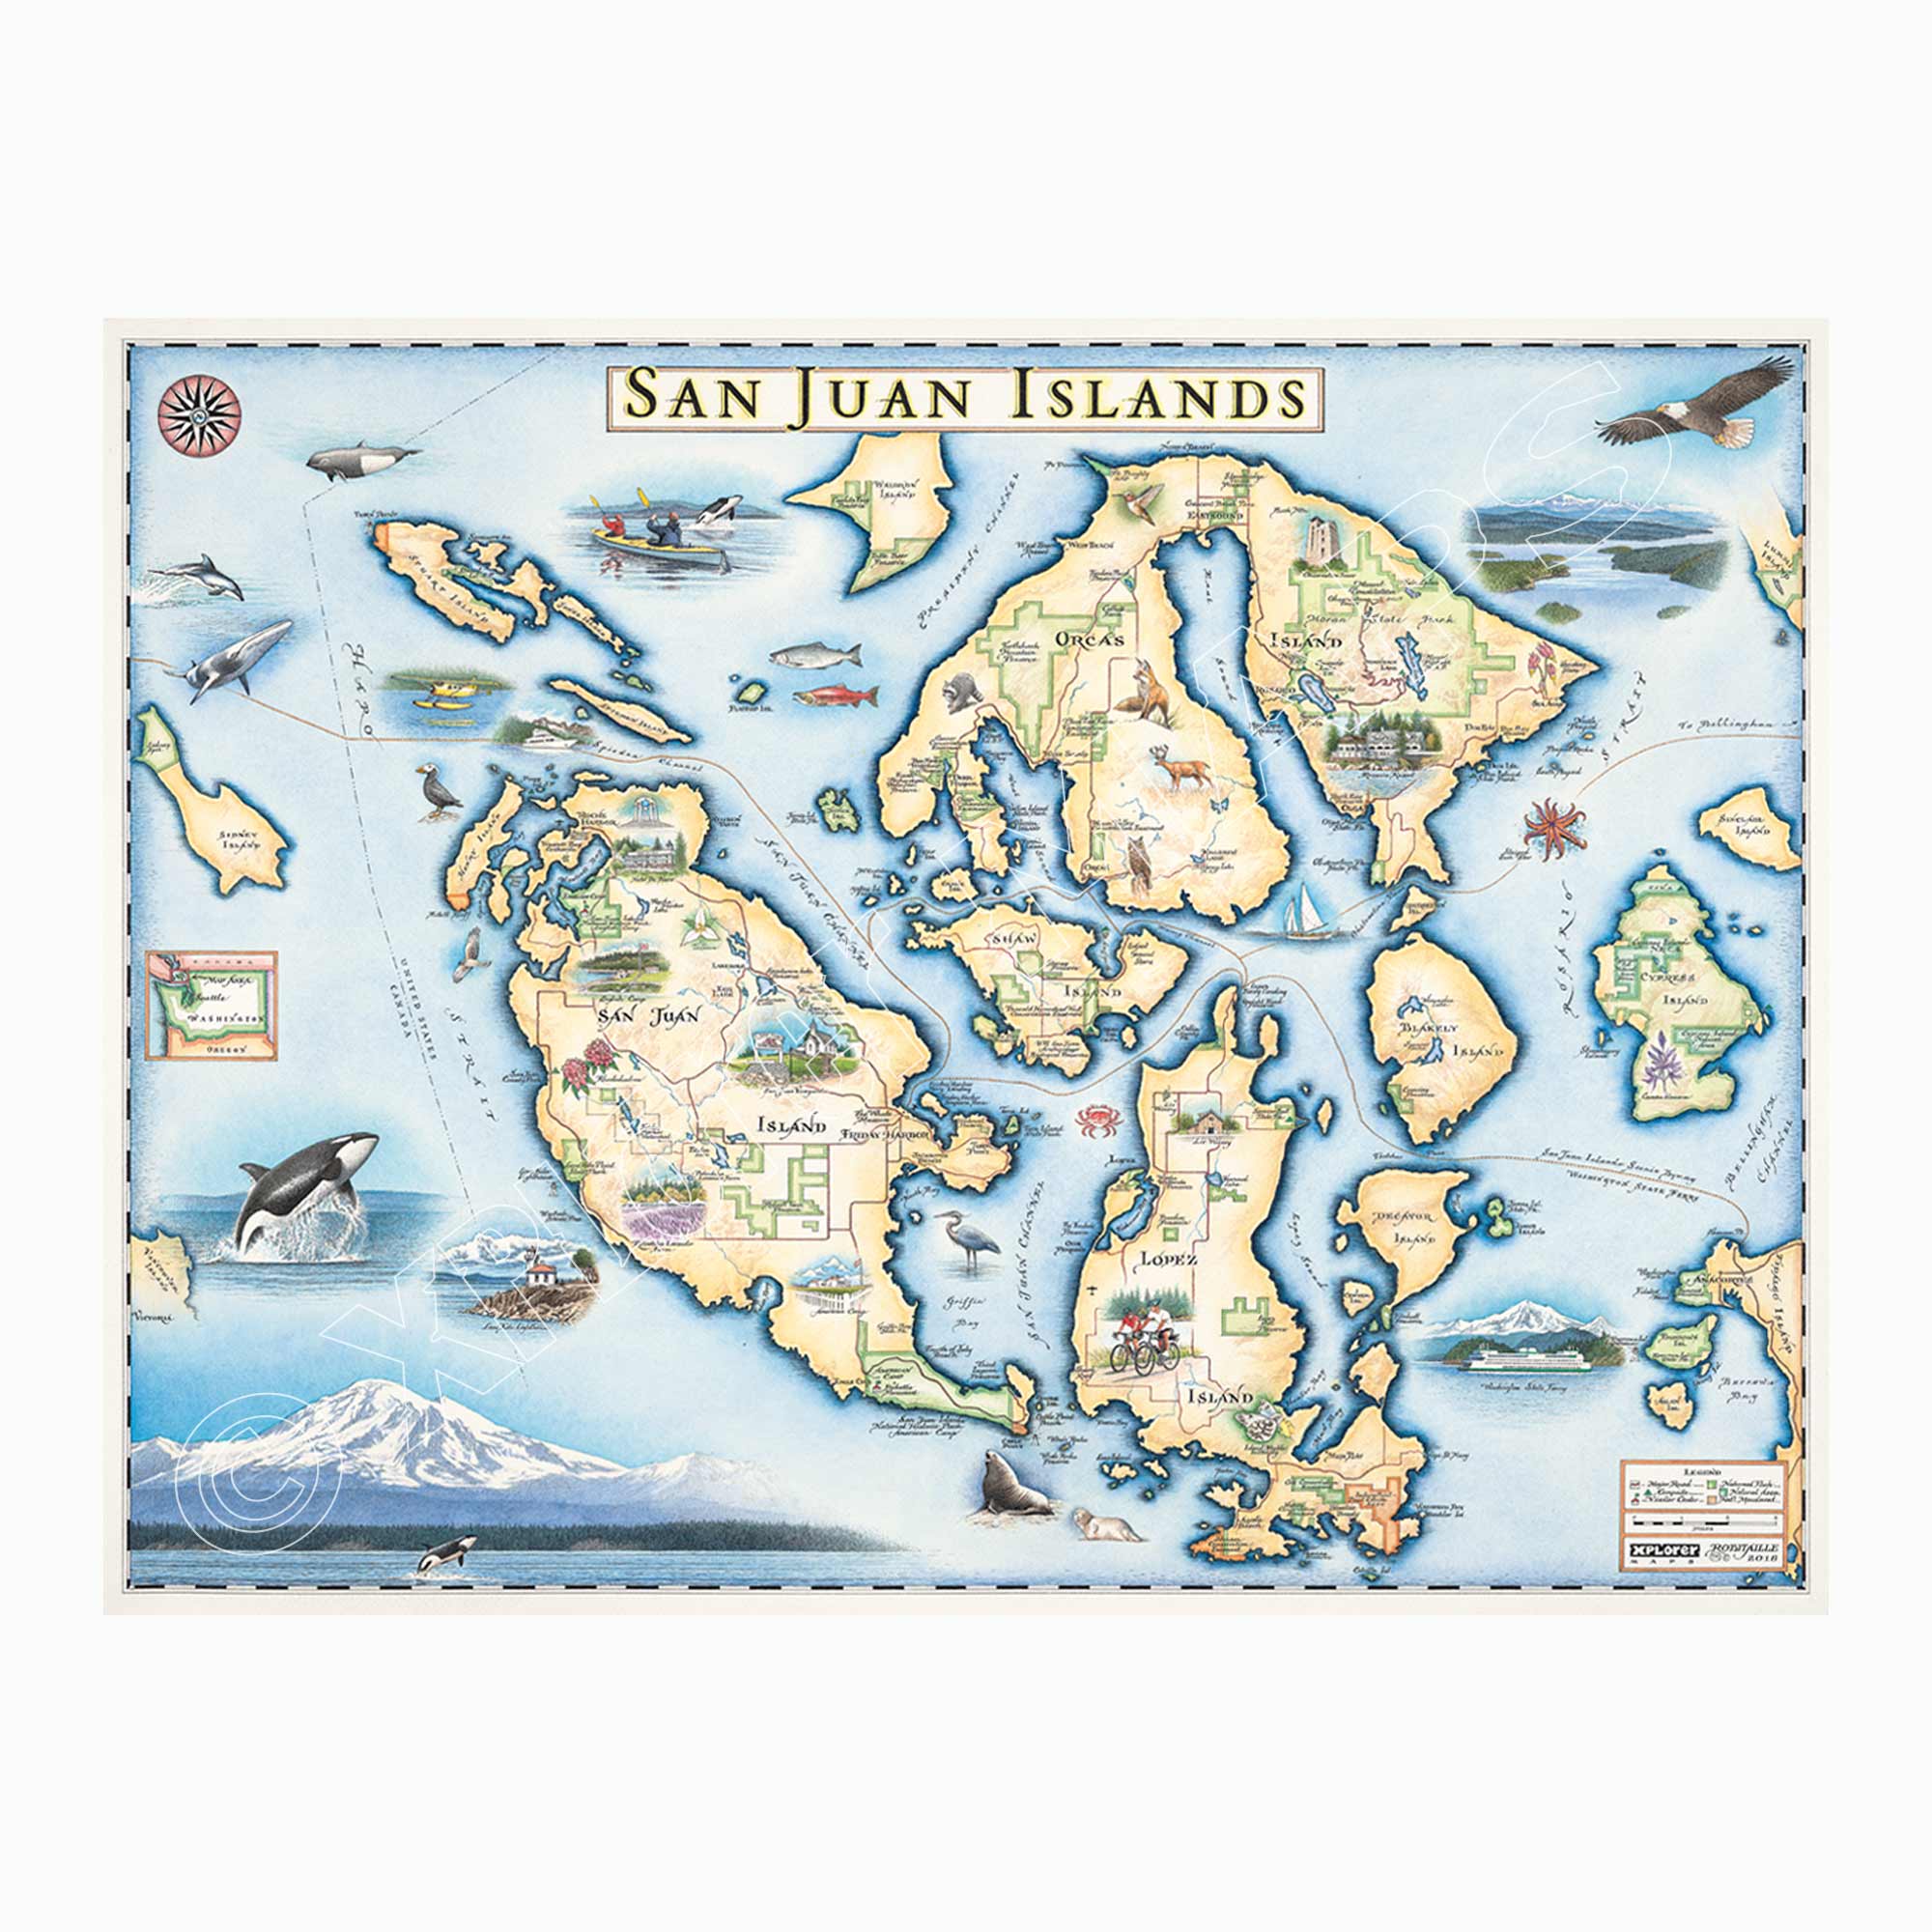 The San Juan Islands hand-drawn map in earth tones blue and green. The map features illustrations of places such as San Juan Vineyard, Turtleback Mountain Reserve, Liv Winery, and Roche Harbor. Flora and fauna include Orca Whale, Puffin, Herron, camas flower, and rhododendron. Measures 24x18.